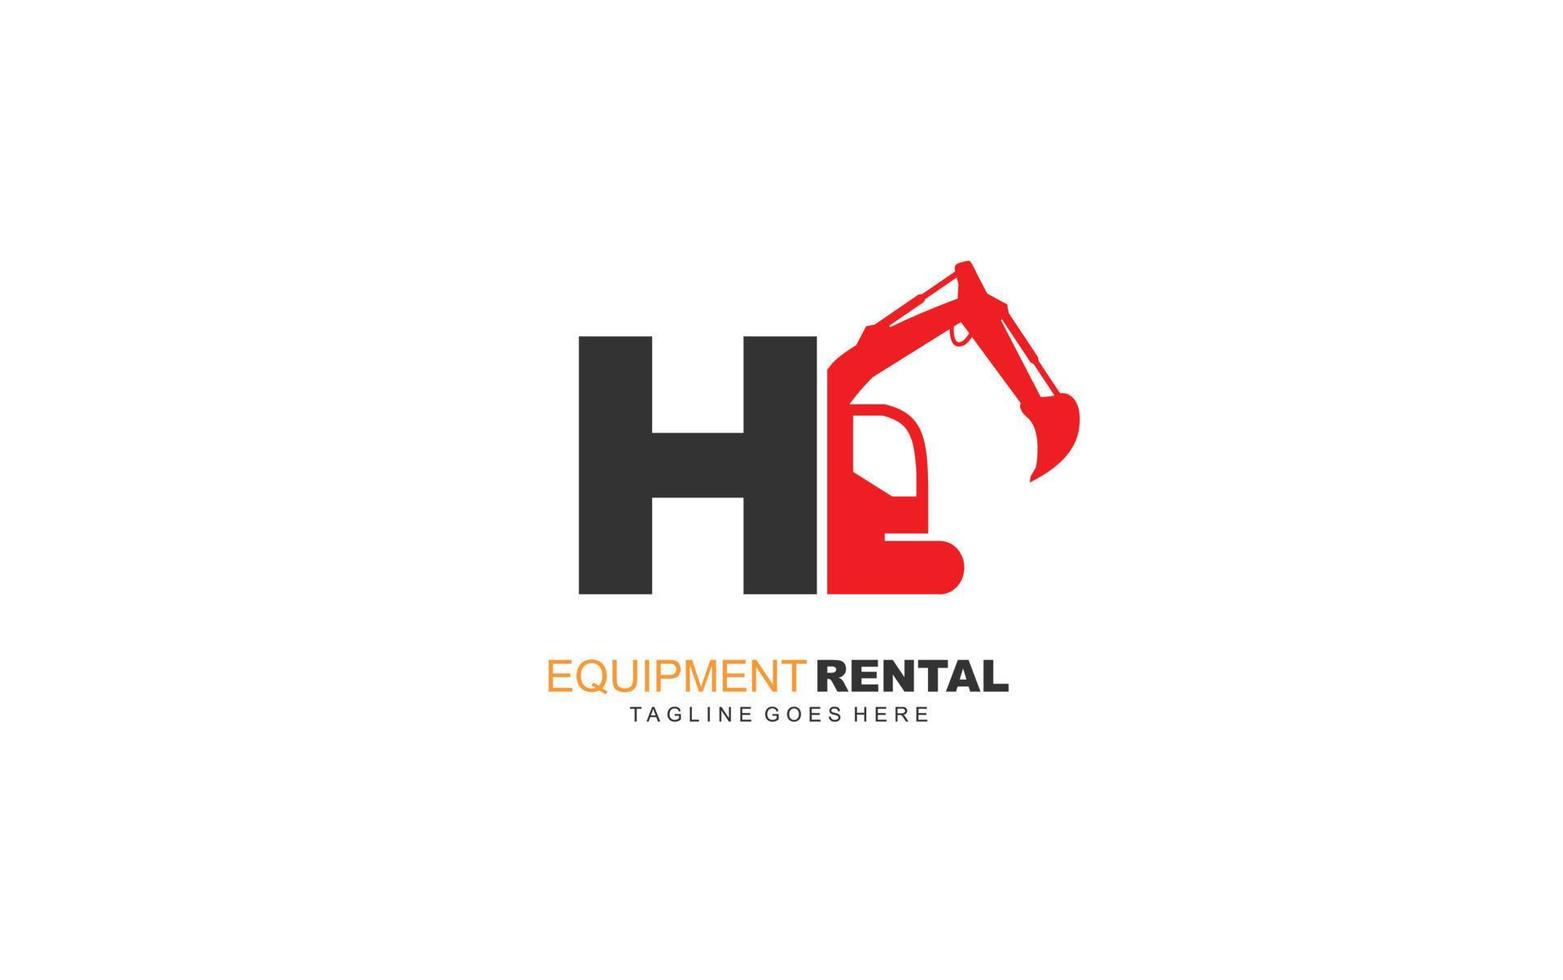 H logo excavator for construction company. Heavy equipment template vector illustration for your brand.